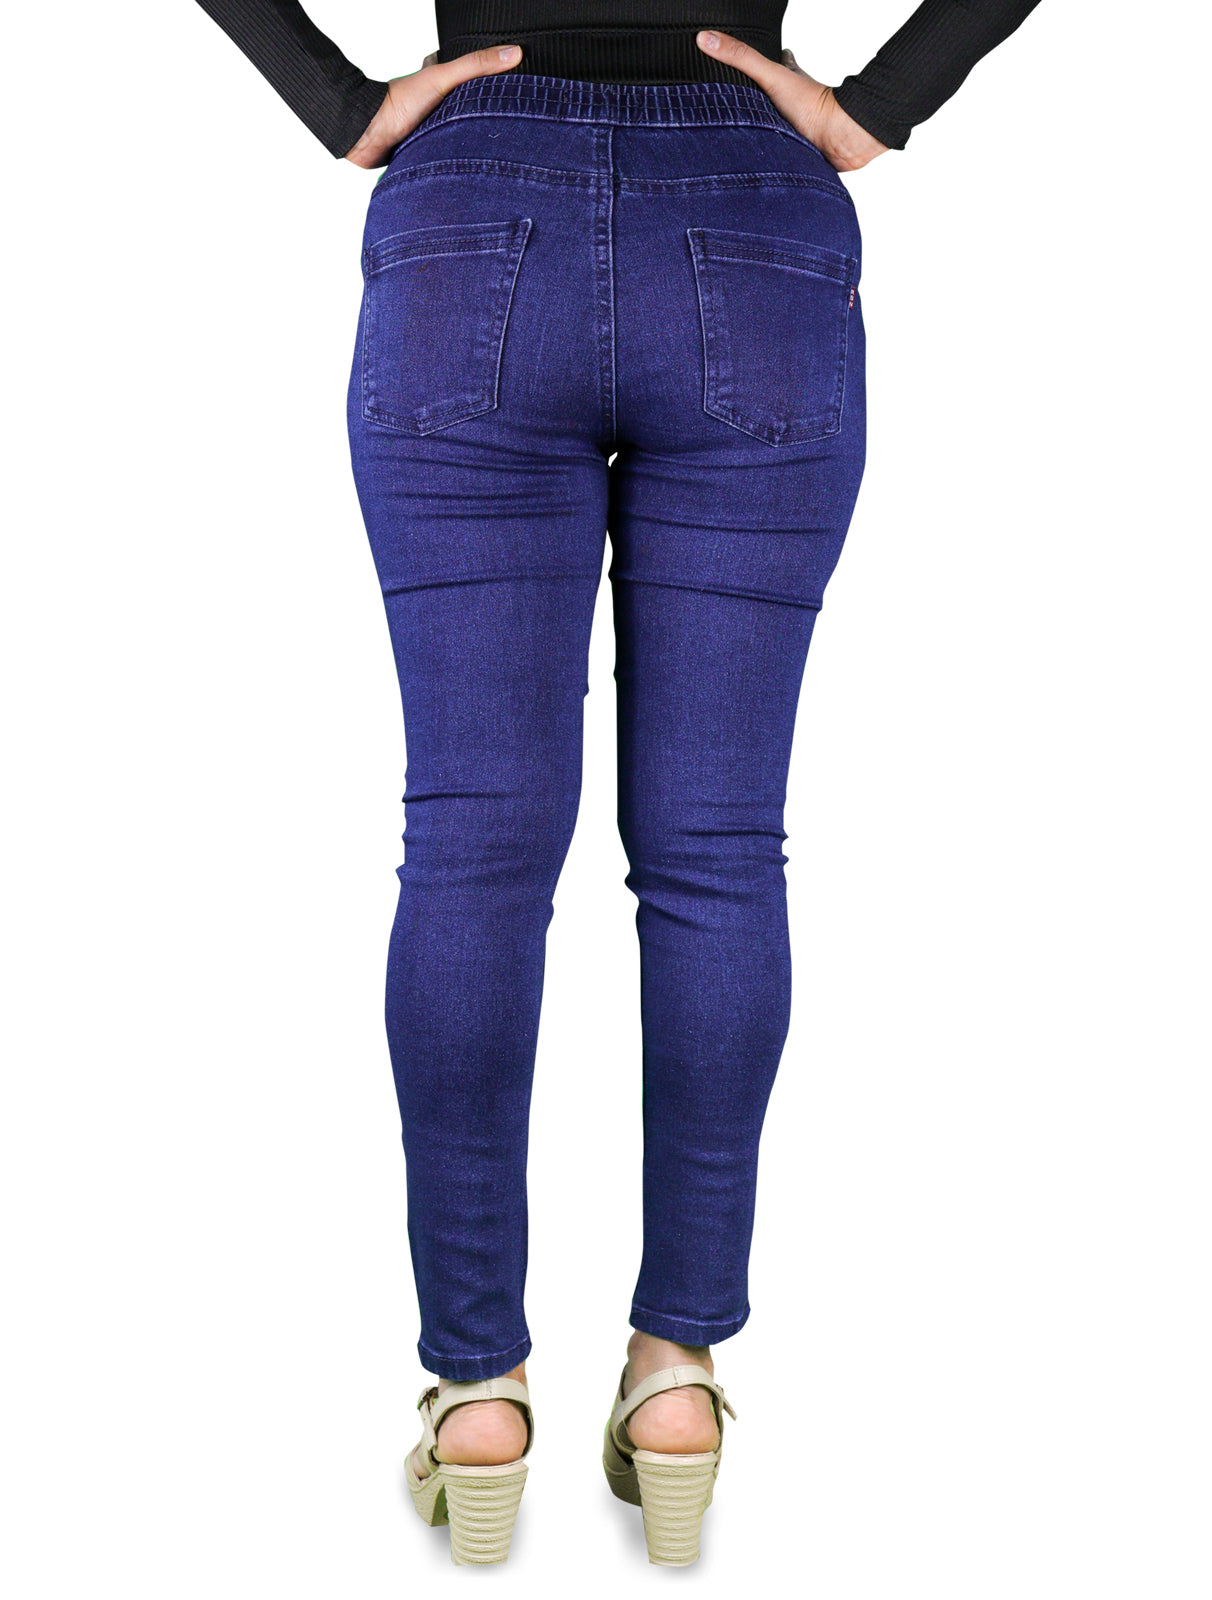 High Waist Blue Fitwings Womens Jeggings 6XL to 7XL, Skinny Fit at